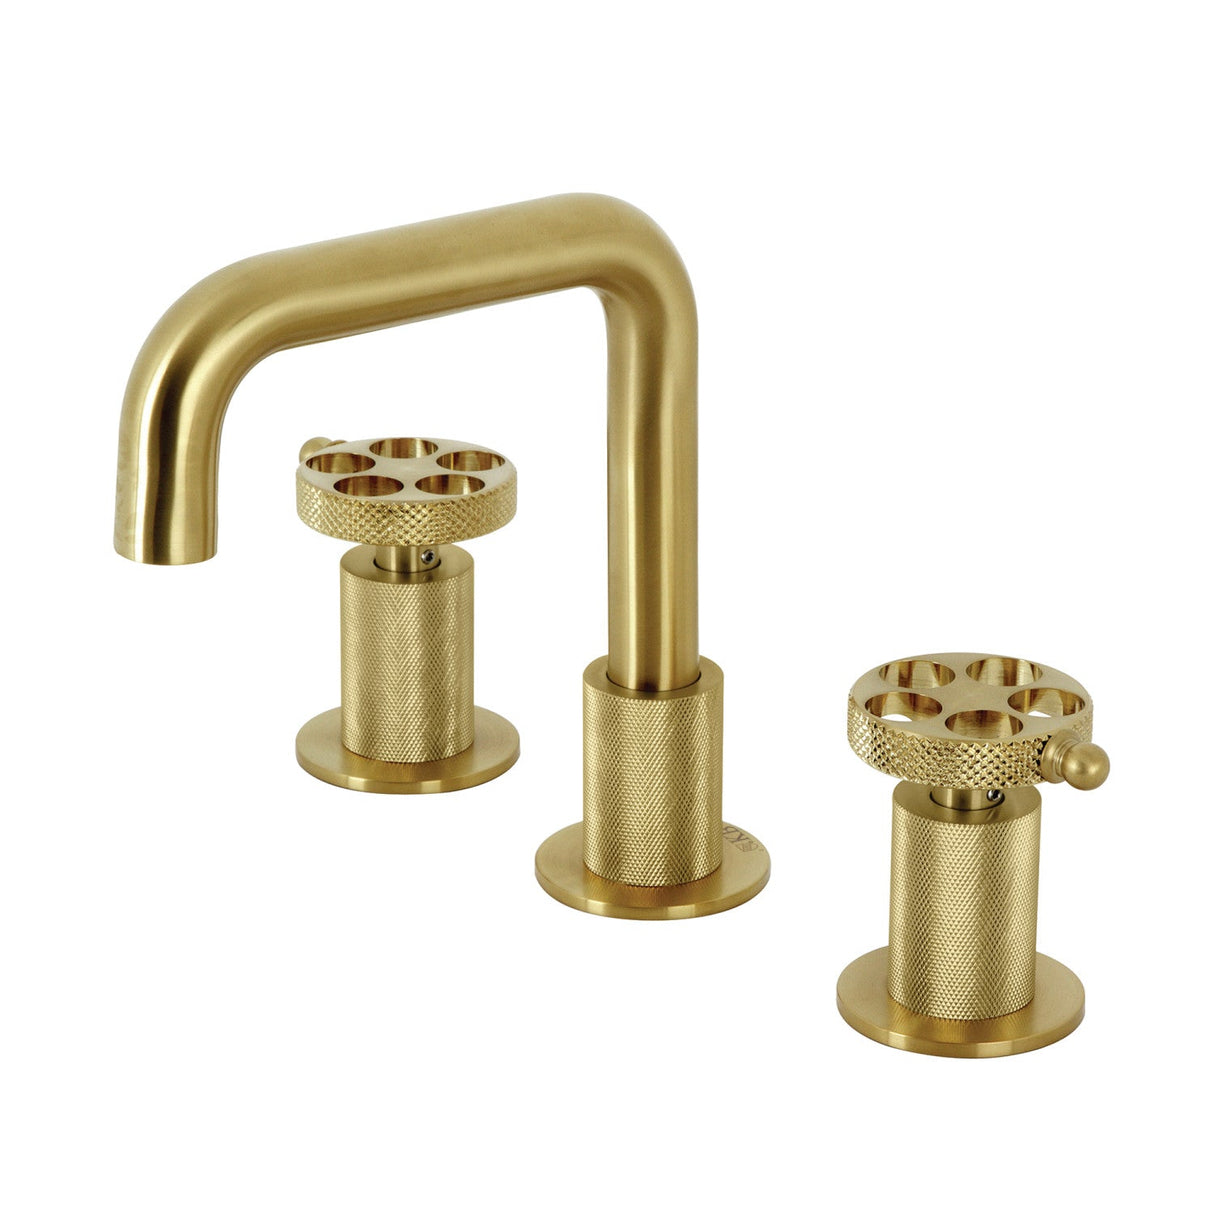 Webb KS1417RKX Two-Handle 3-Hole Deck Mount Widespread Bathroom Faucet with Knurled Handle and Push Pop-Up Drain, Brushed Brass